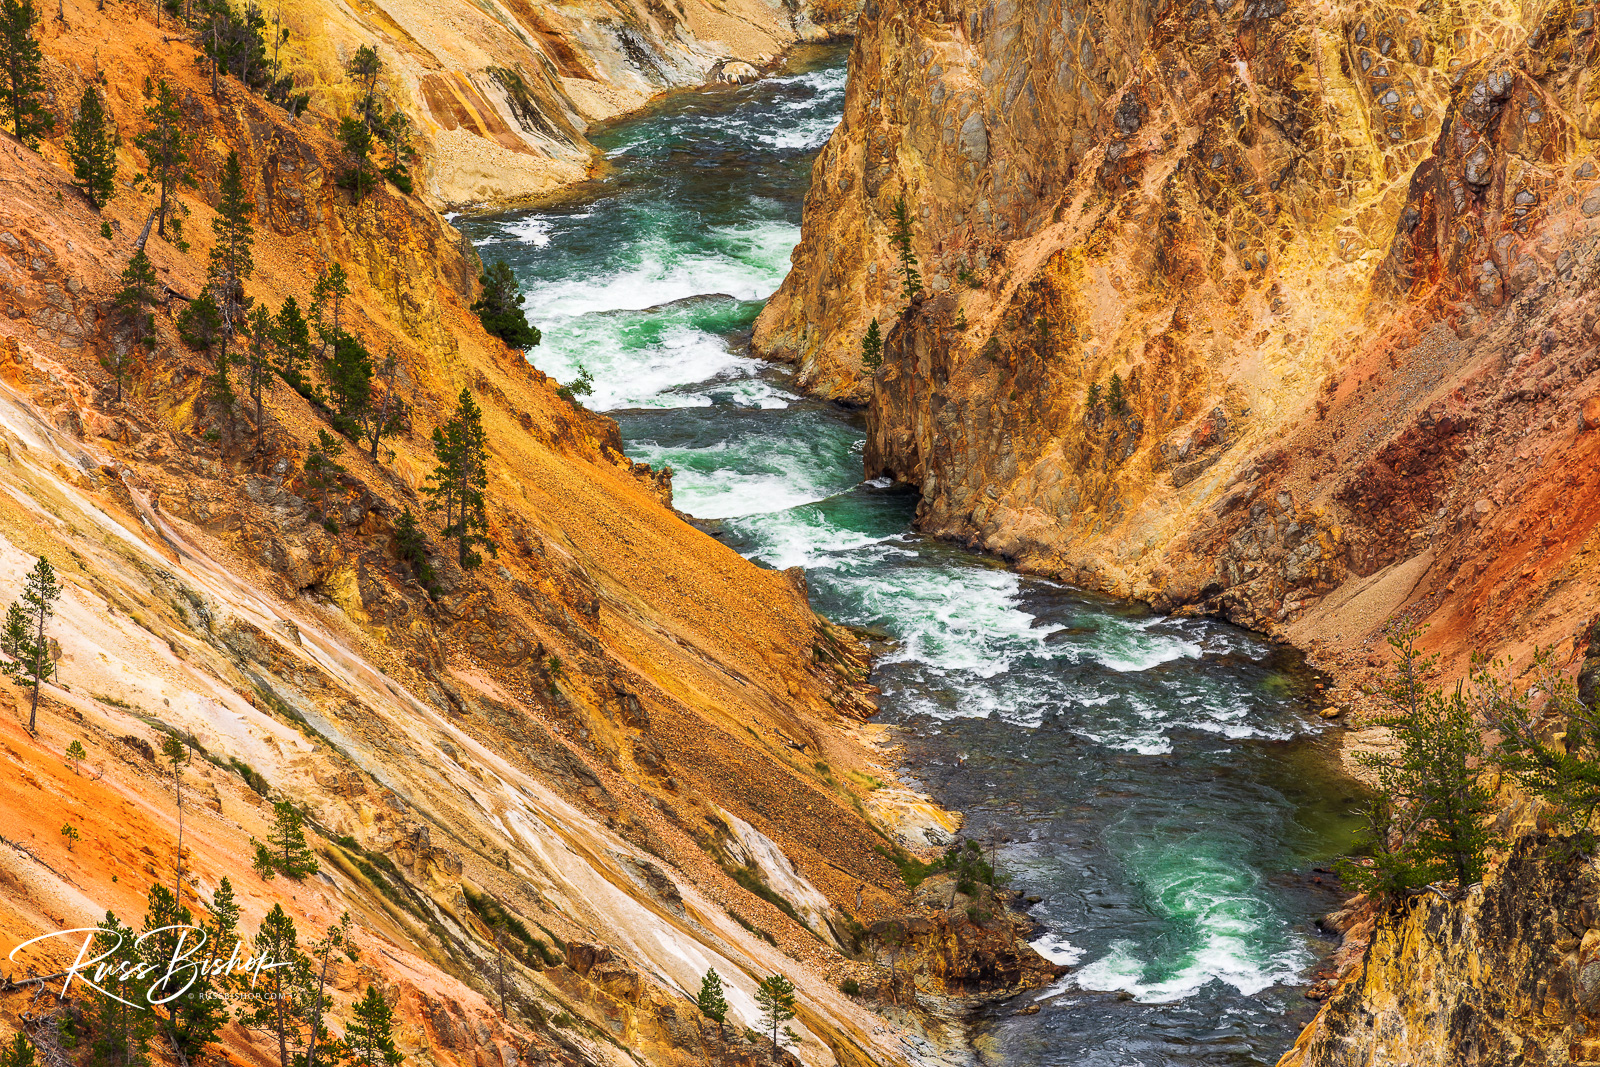 The Yellowstone River in the Grand Canyon of the Yellowstone, Yellowstone NP, Wyoming